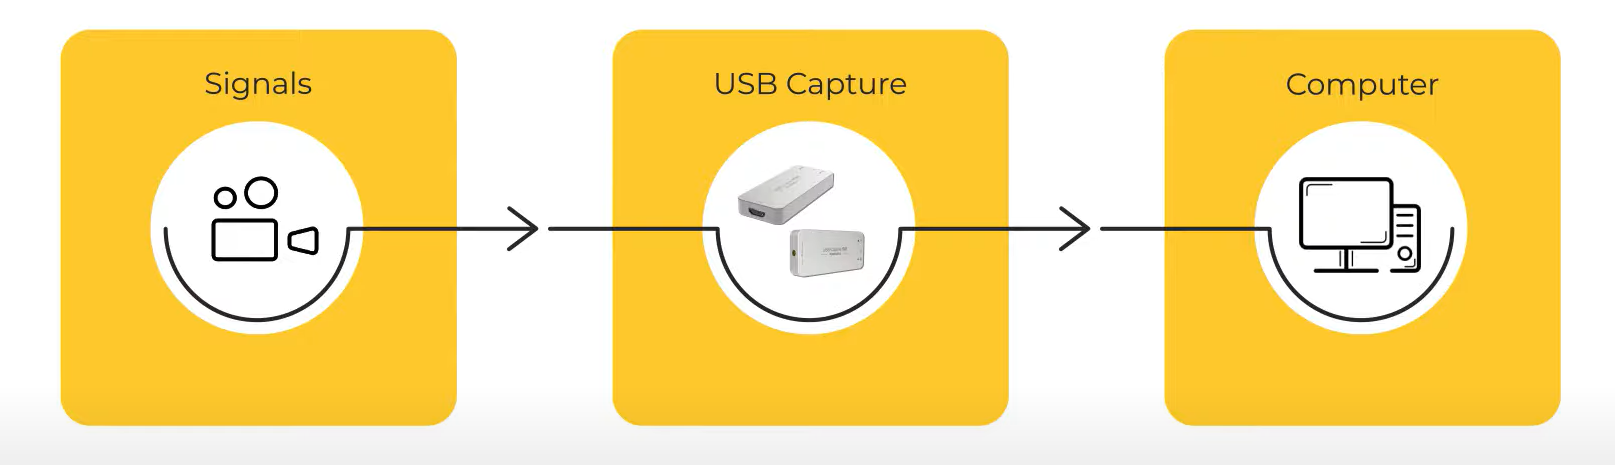 Magewell USB capture solution